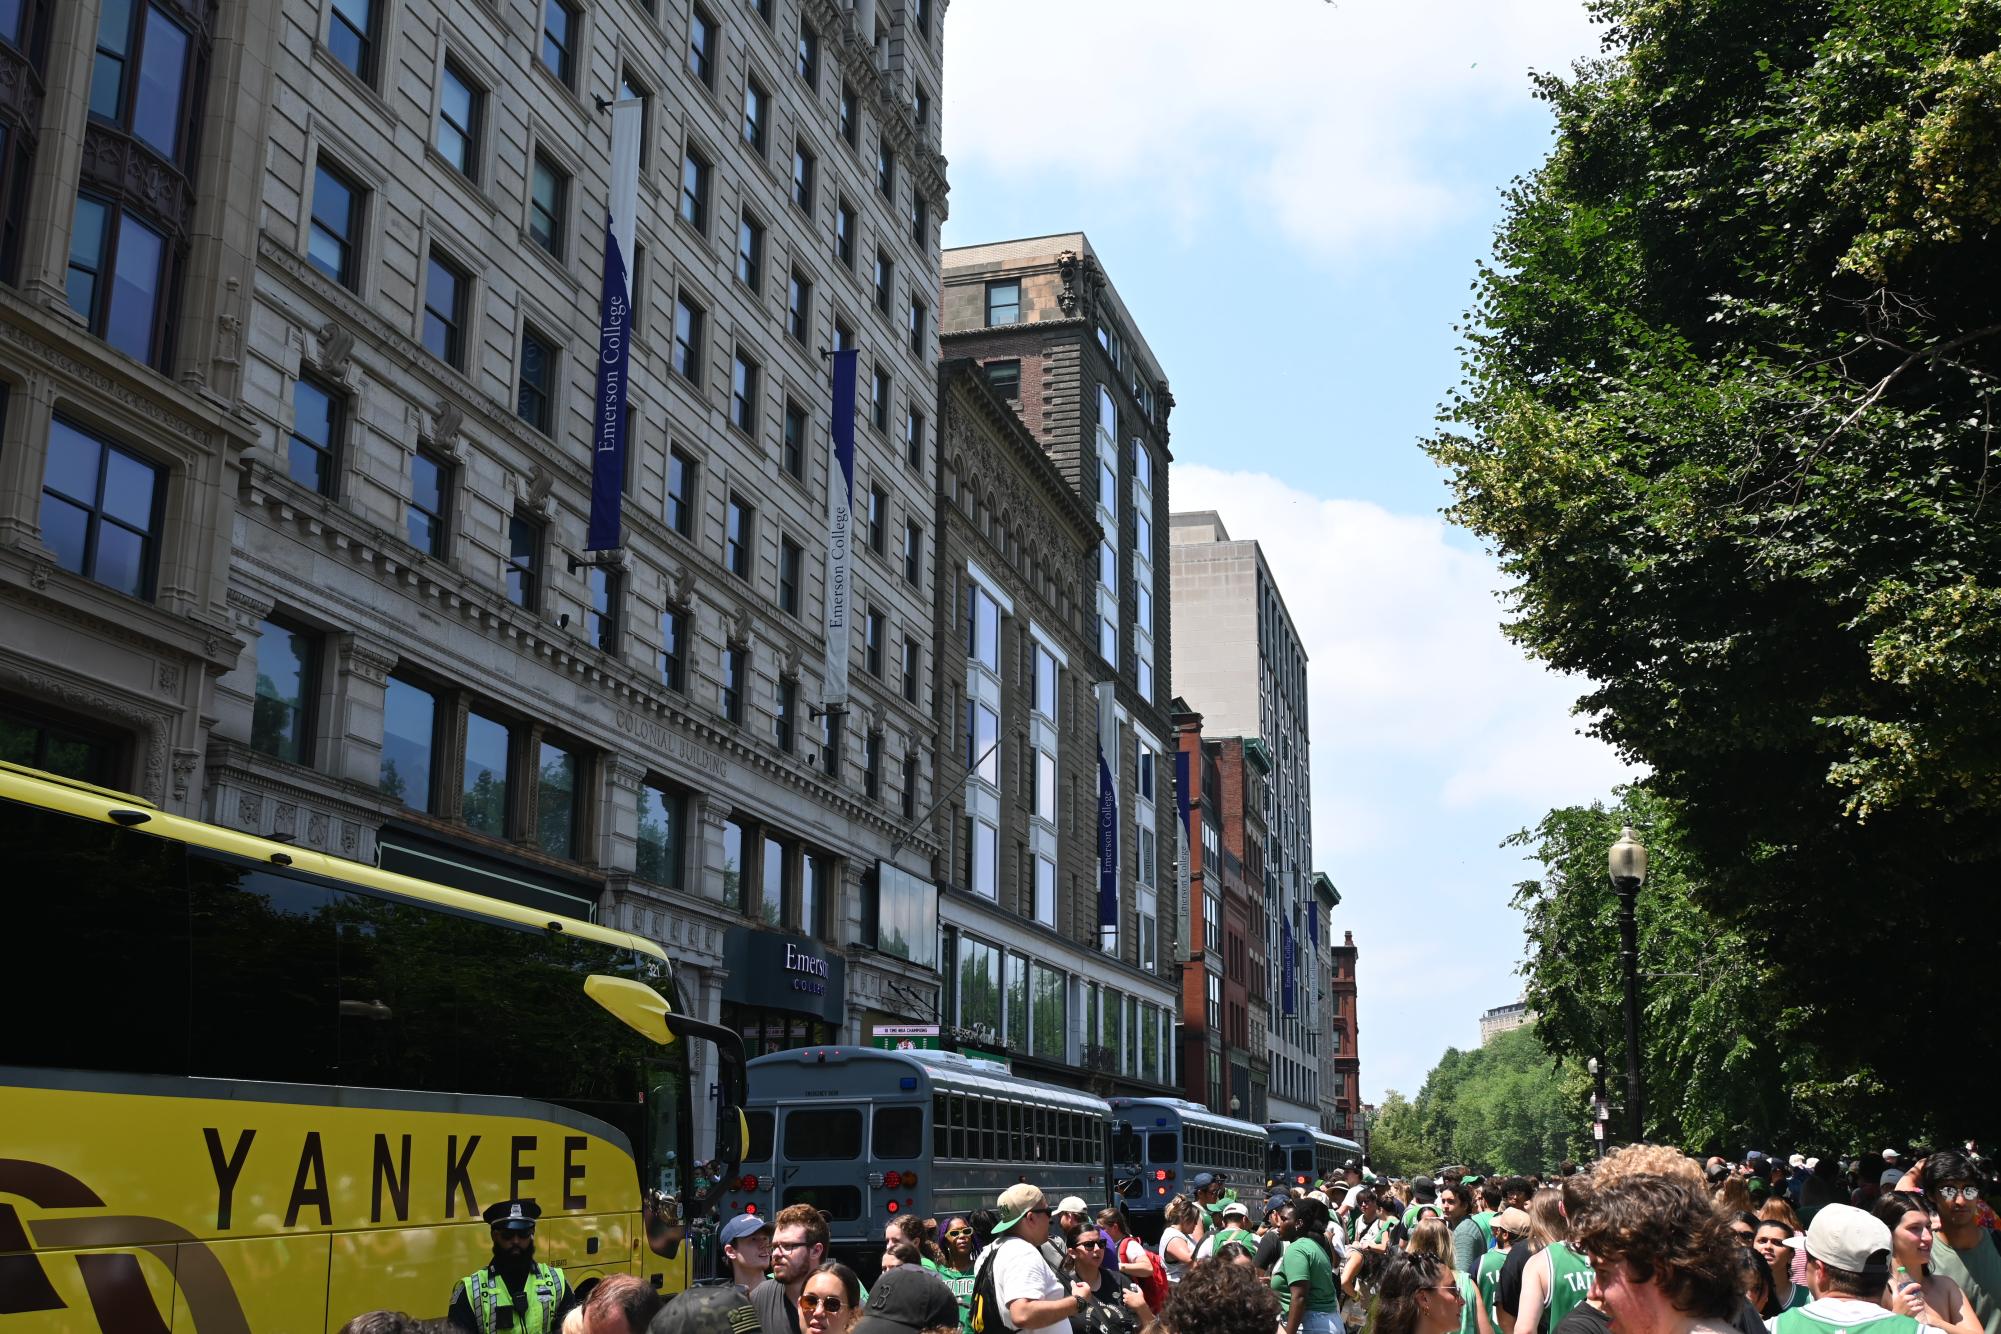 The+Celtics+parade+brought+all+walks+of+life+together+throughout+the+city+of+Boston%2C+with+fans+littering+the+streets+in+green+clothing%2C+confetti%2C+and+signs.+%0D%0A